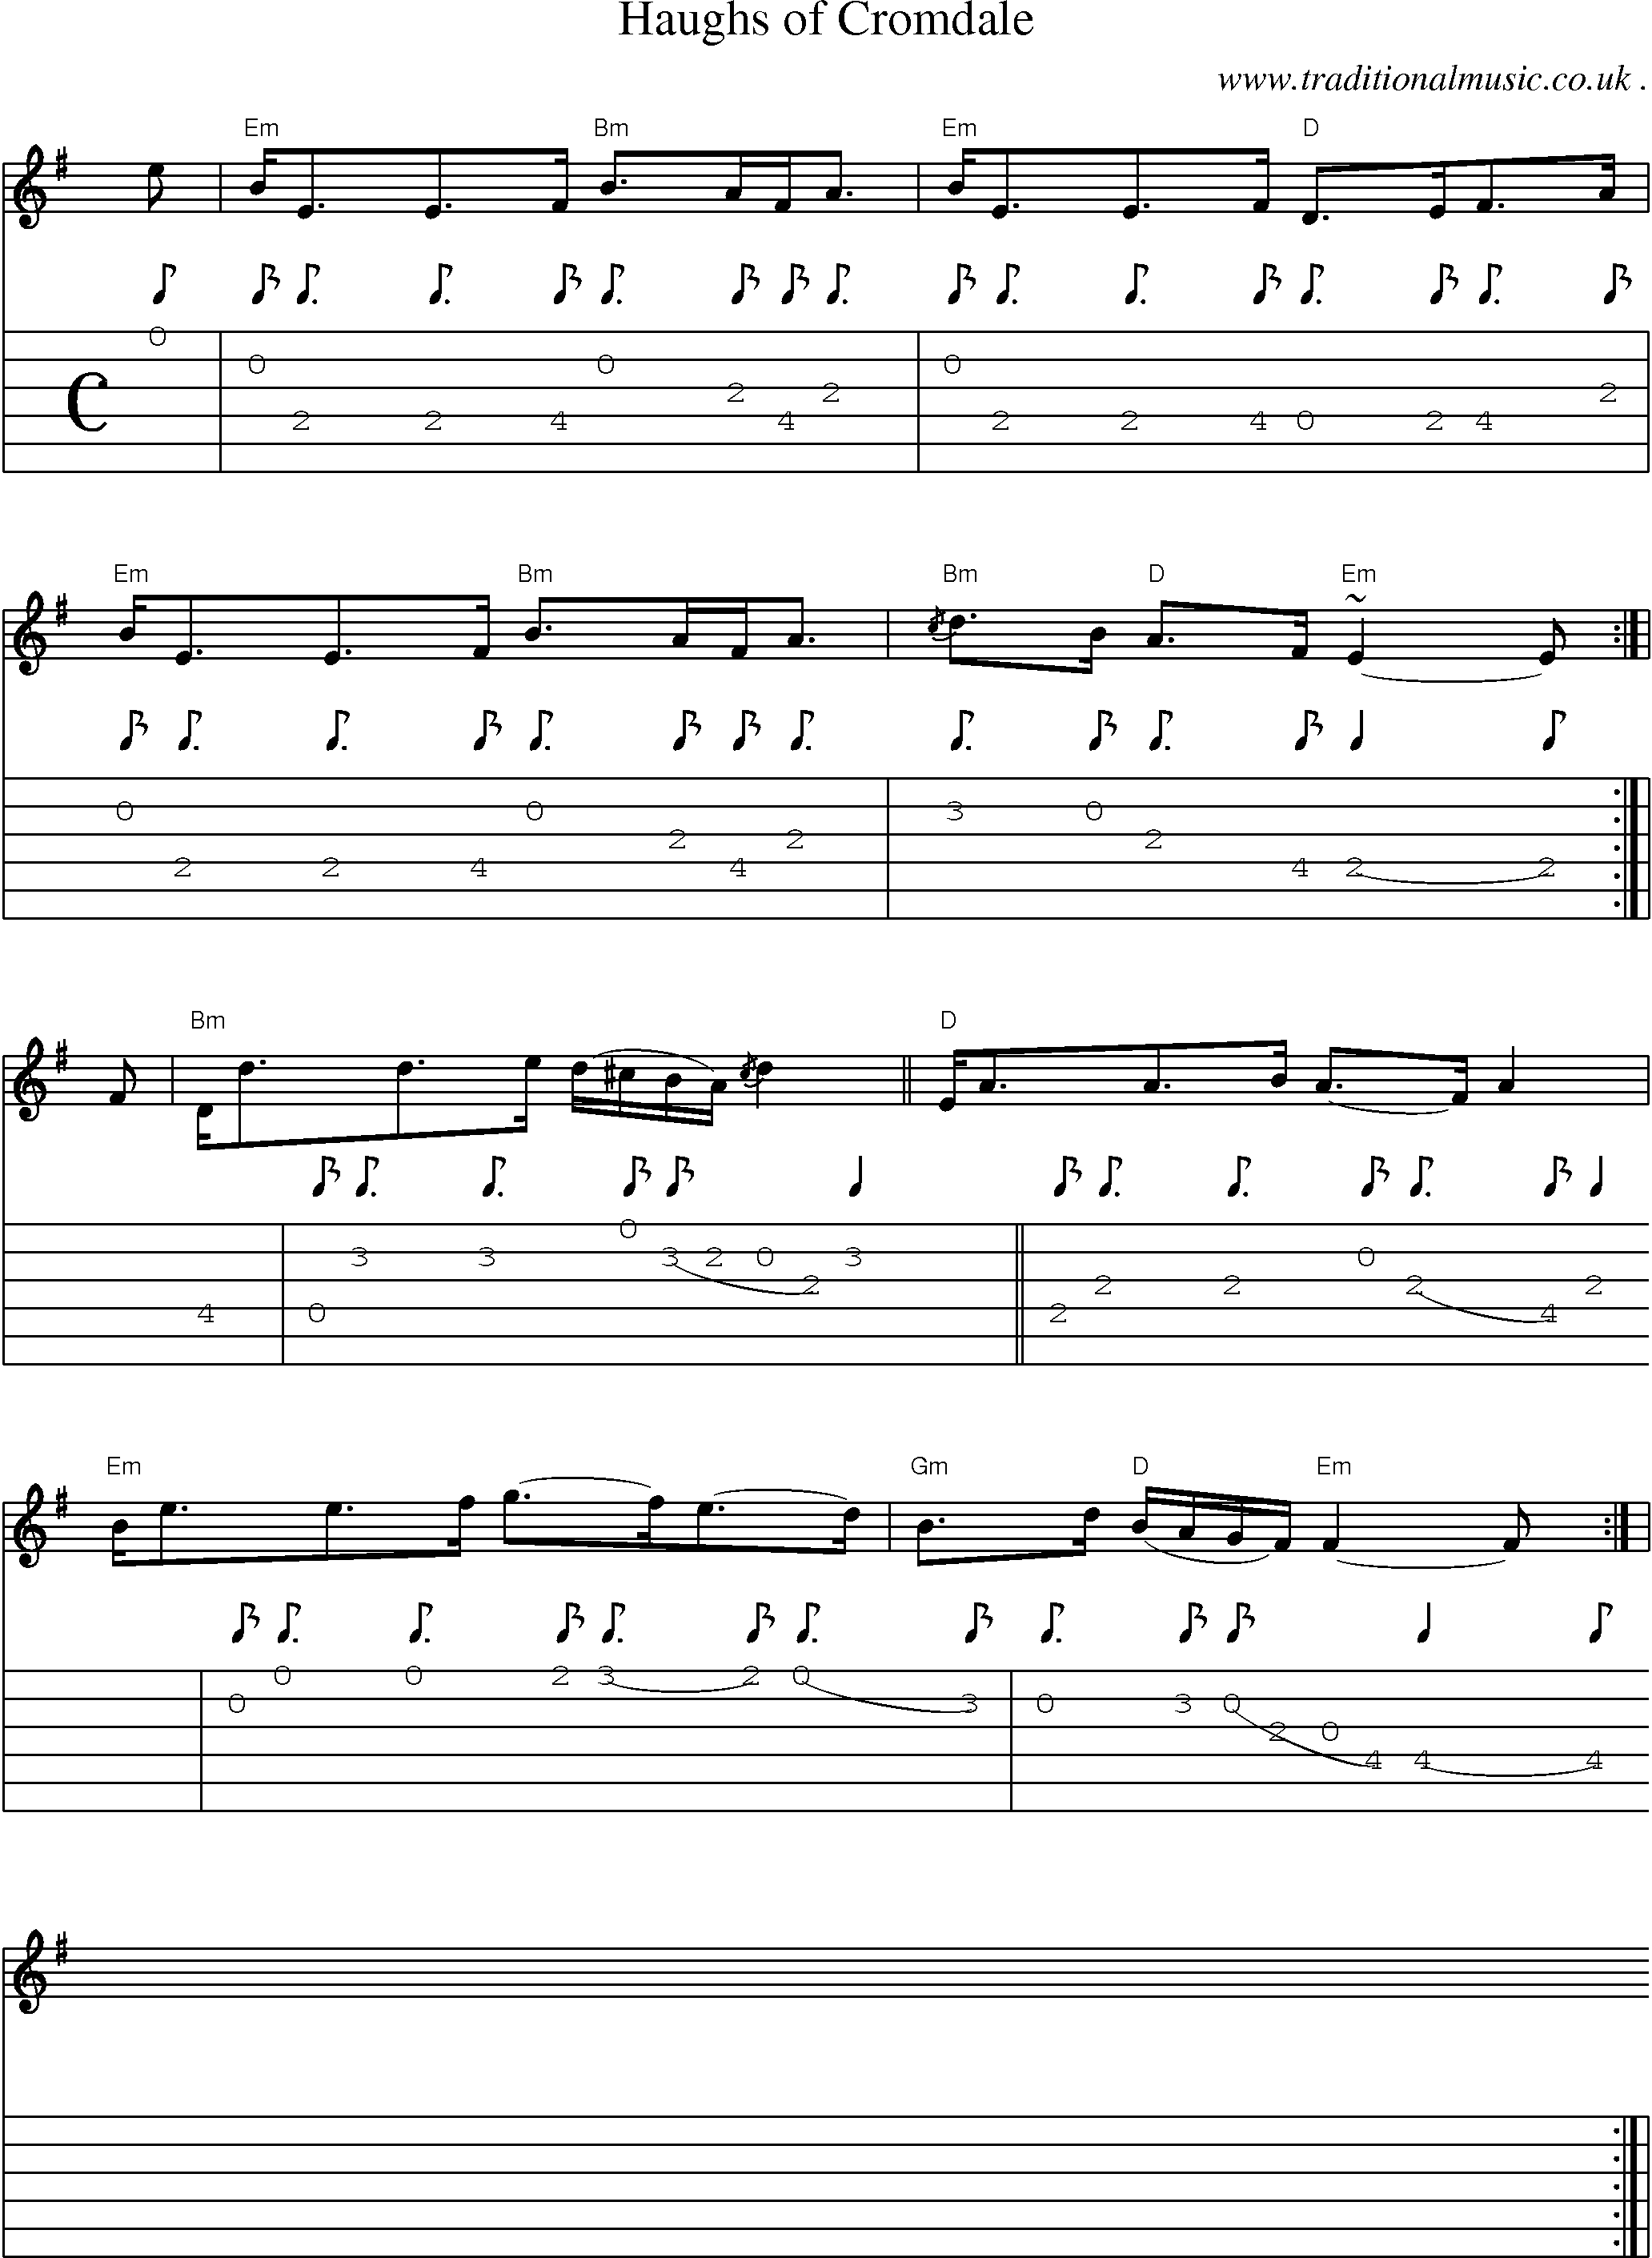 Sheet-music  score, Chords and Guitar Tabs for Haughs Of Cromdale